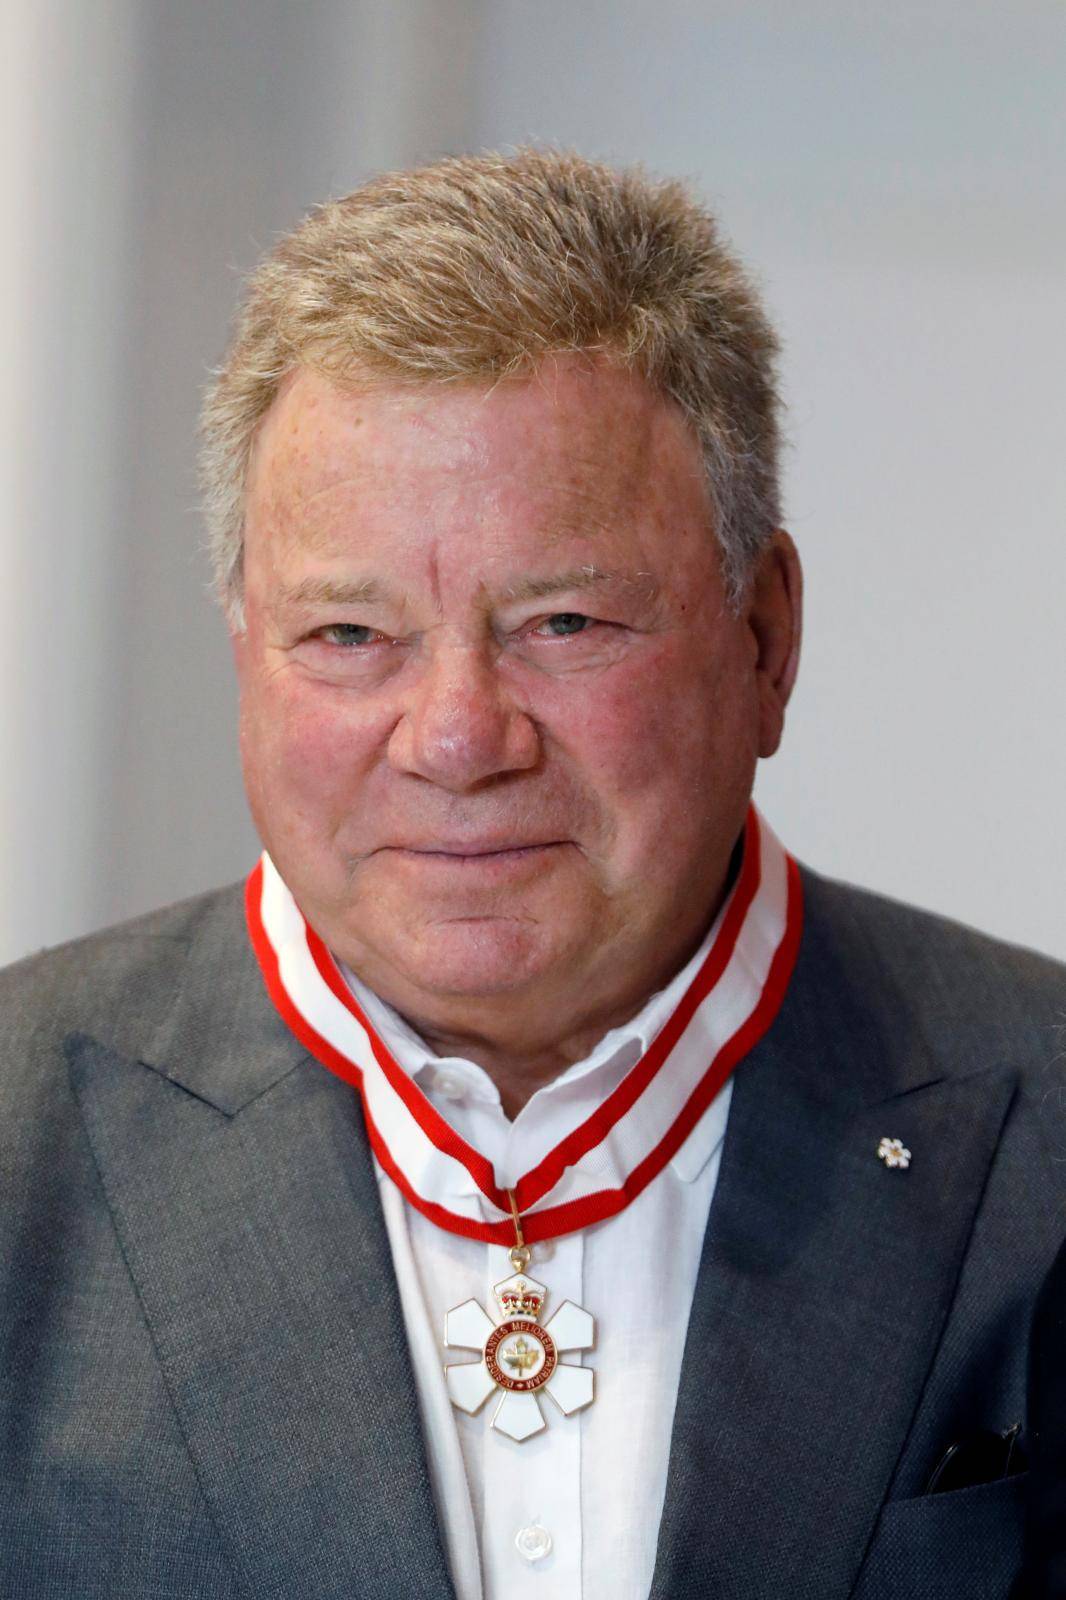 Actor Shatner poses after being promoted to rank of Officer in Order of Canada in Ottawa